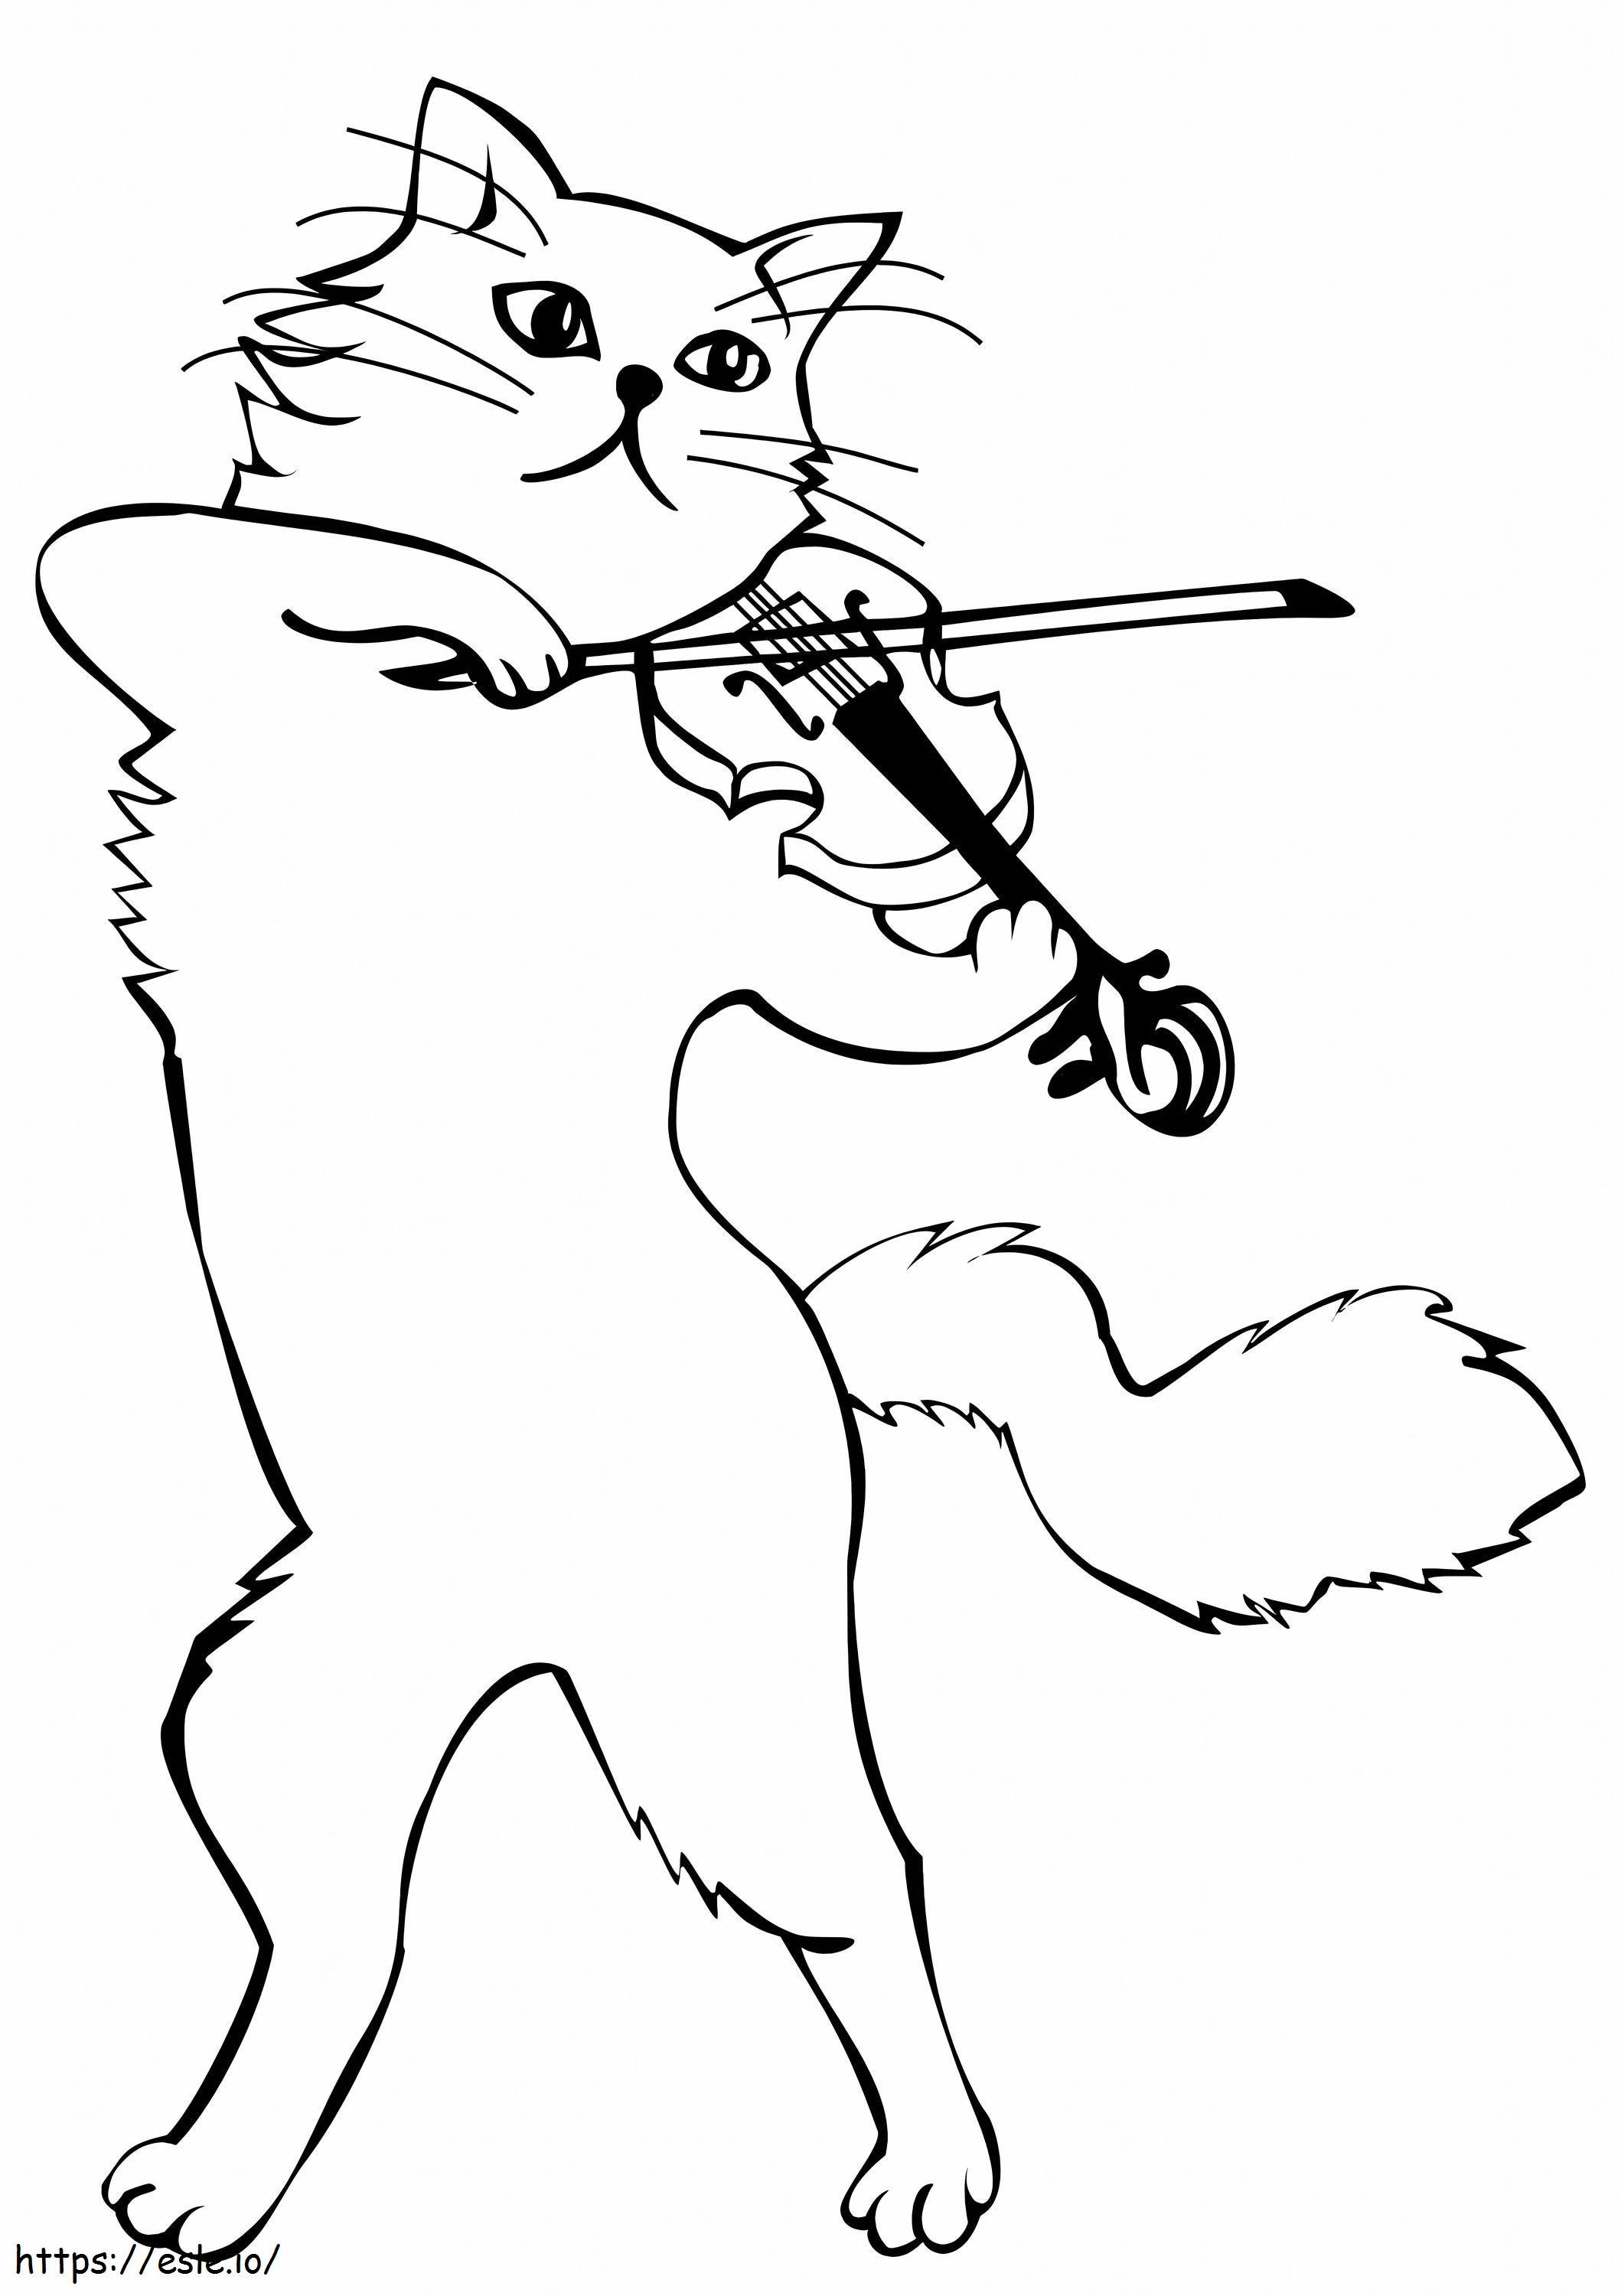 Cat Playing The Violin coloring page